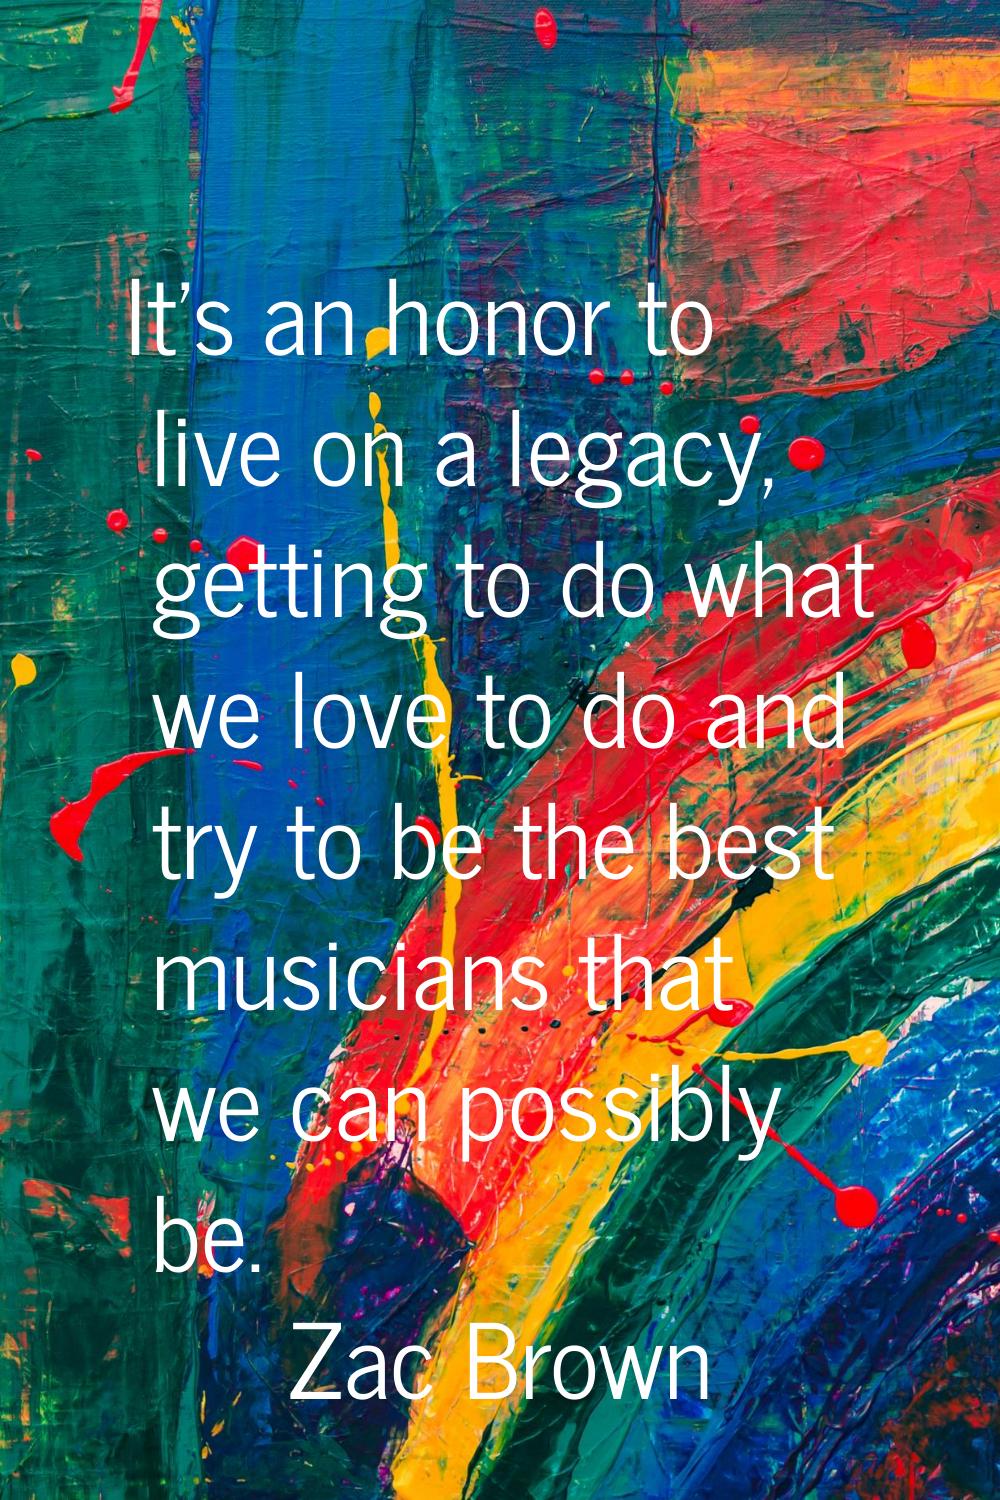 It's an honor to live on a legacy, getting to do what we love to do and try to be the best musician